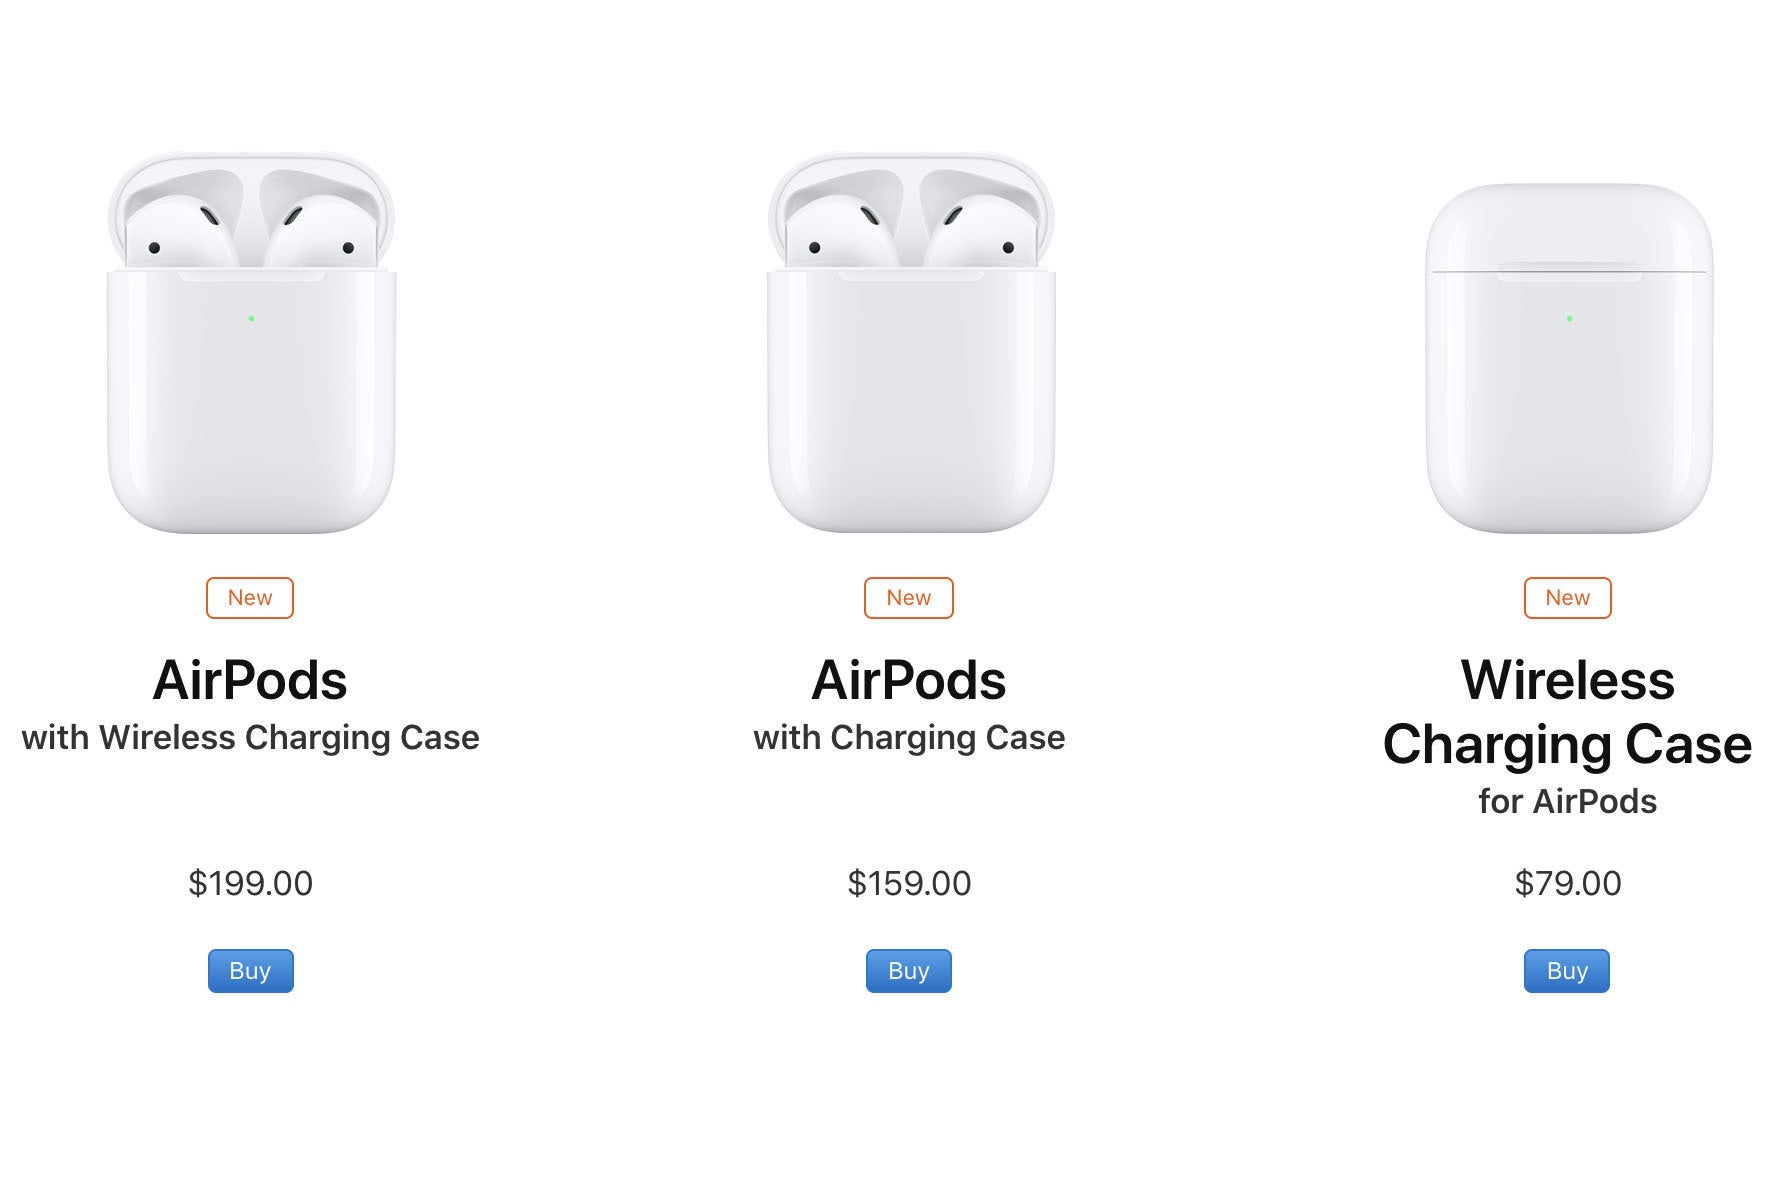 7 things you need to know about Apple's new AirPods | Macworld